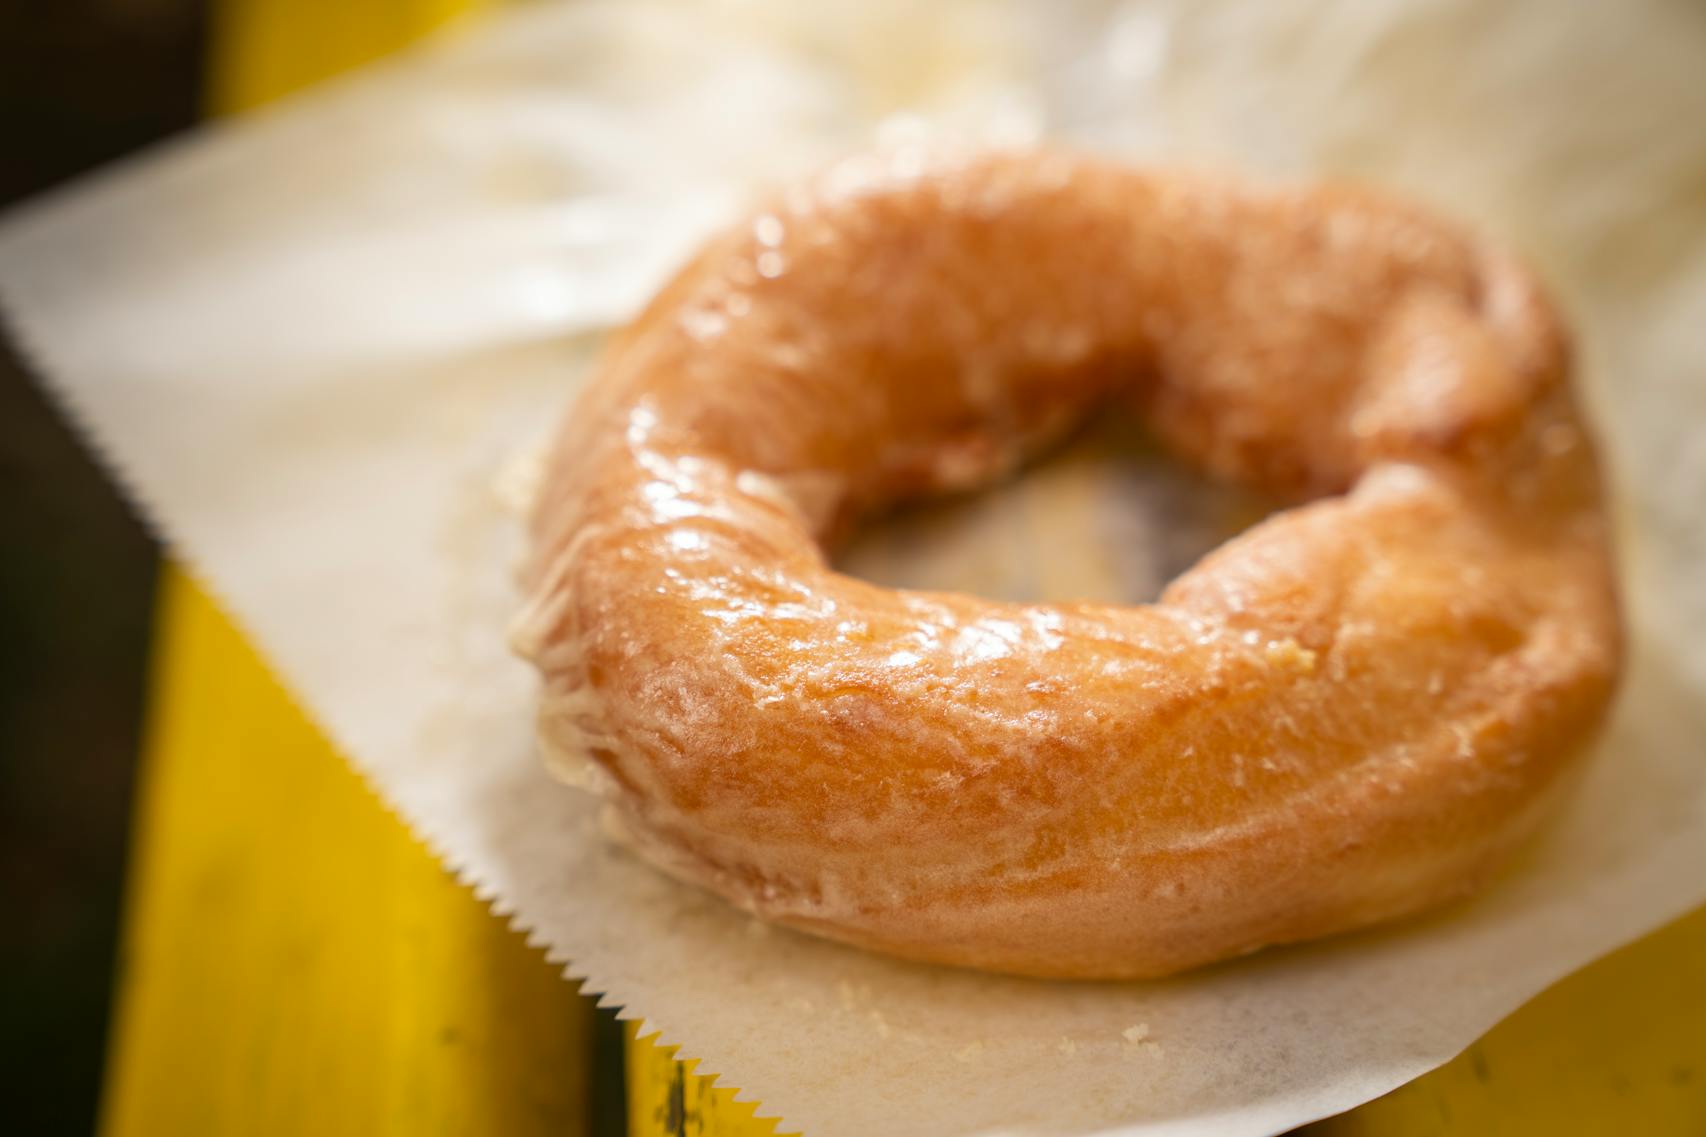 The Amish Doughnut from Peachey’s Baking Company. The new foods of the 2023 Minnesota State Fair photographed on the first day of the fair in Falcon Heights, Minn. on Tuesday, Aug. 8, 2023. ] LEILA NAVIDI • leila.navidi@startribune.com